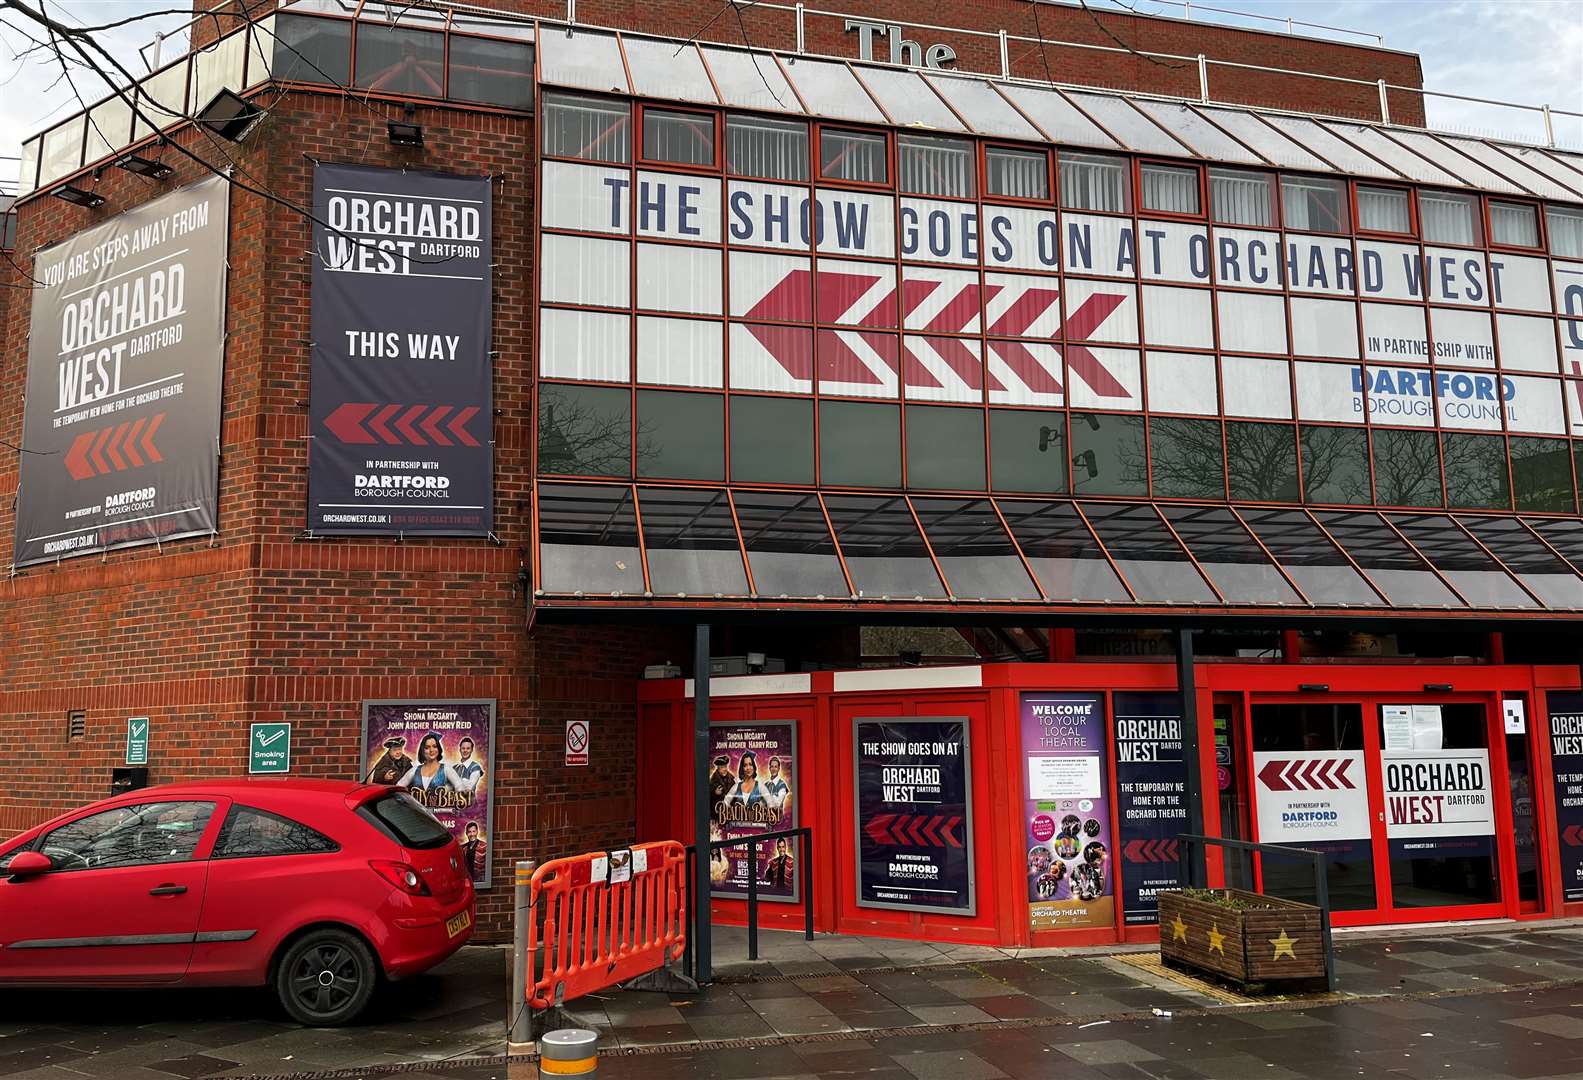 The Orchard Theatre is directing people to the new premises at Orchard West